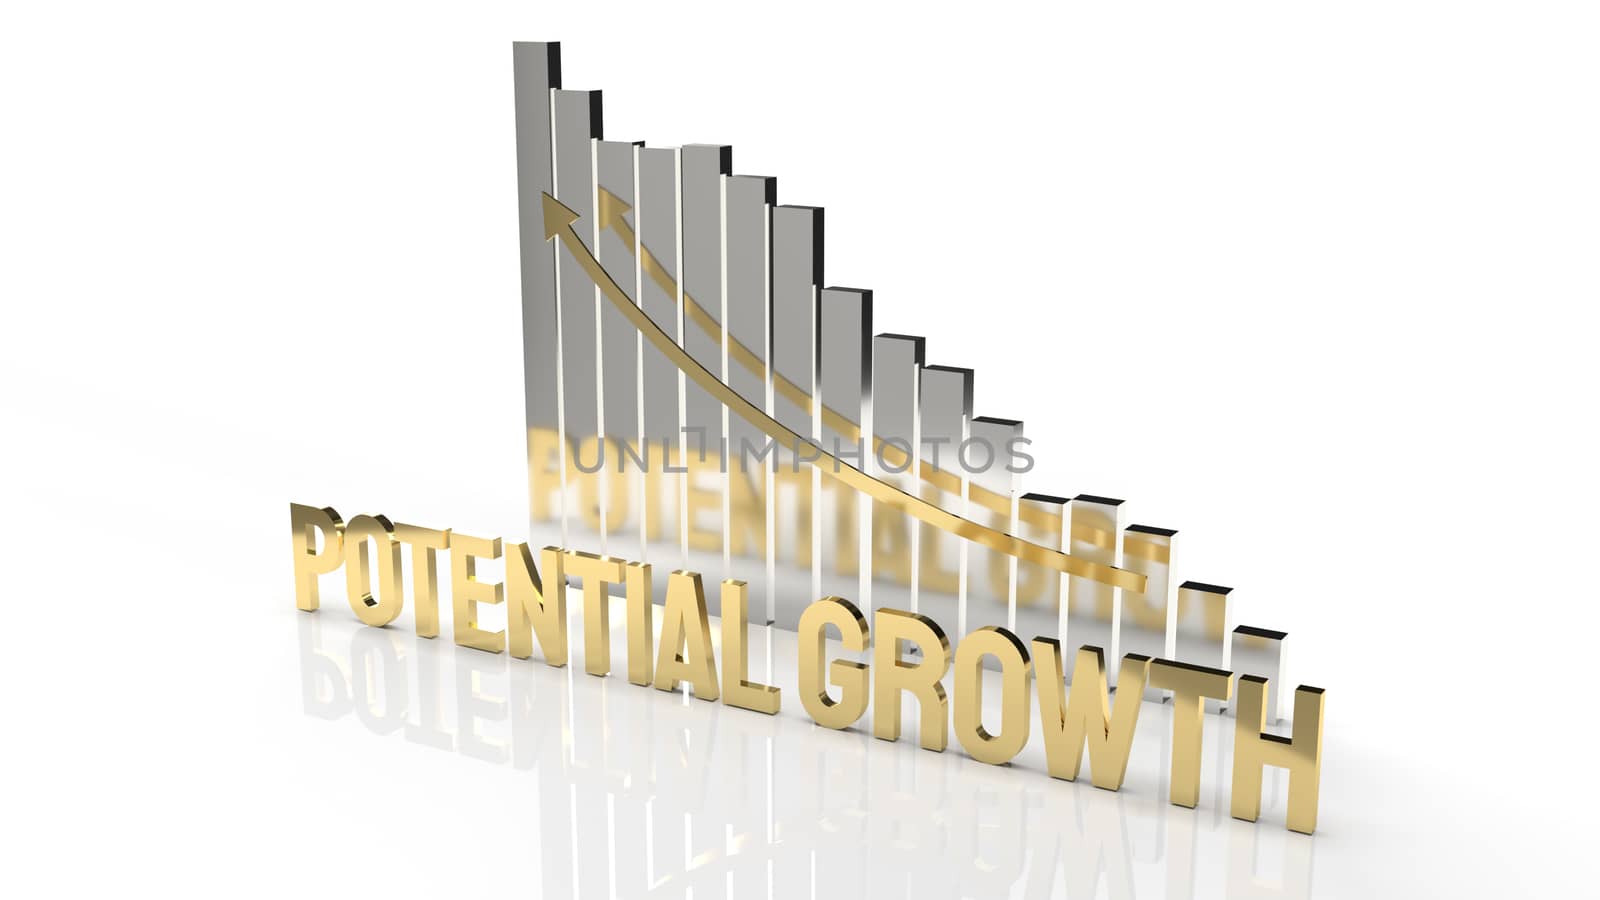 The gold text  potential growth on white background for business content 3d rendering.

